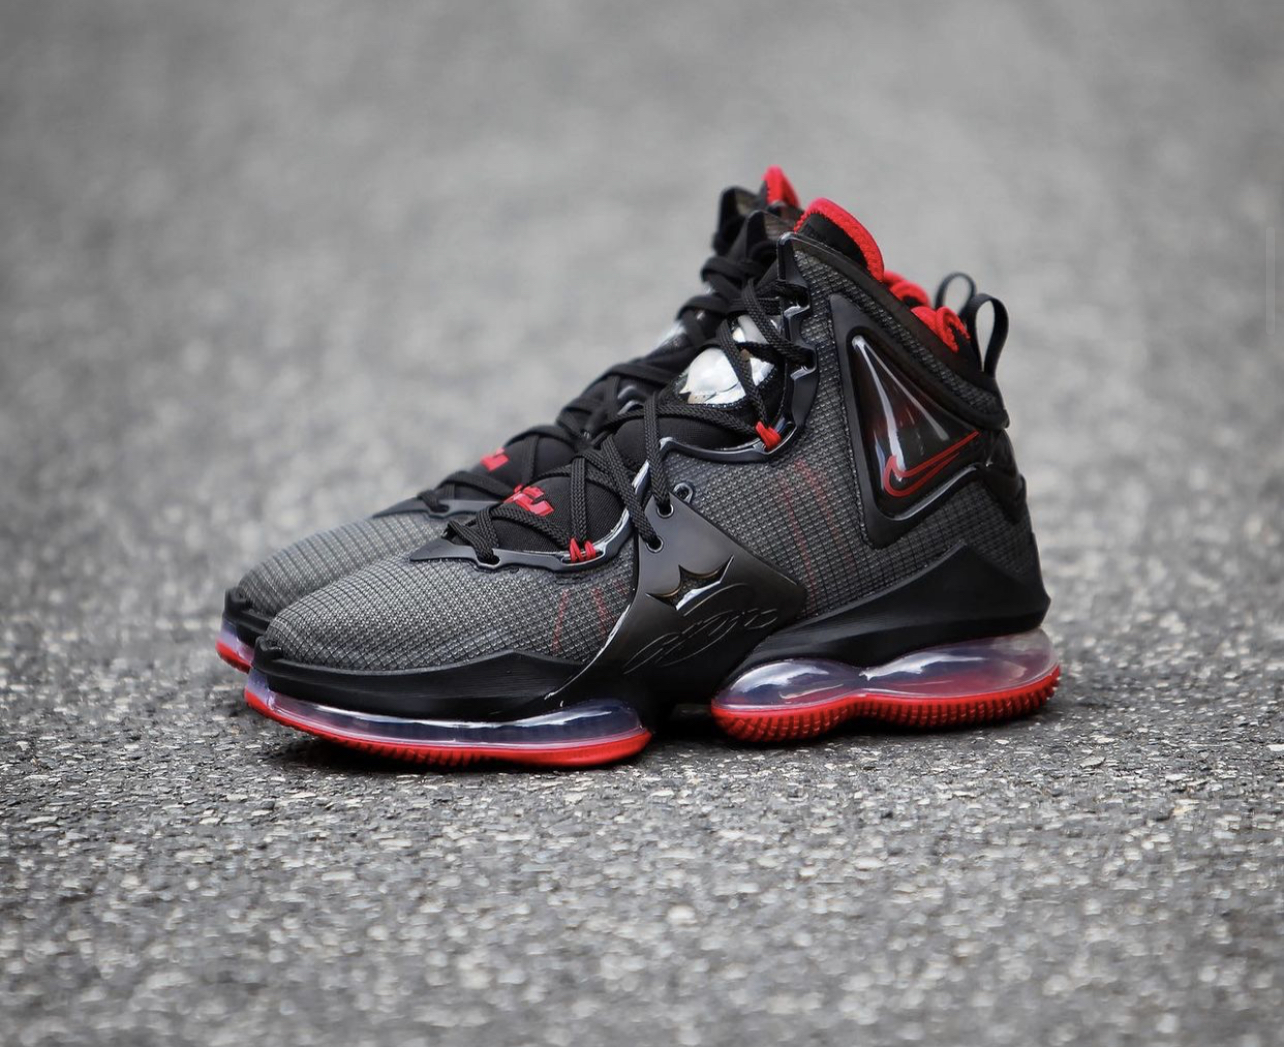 More of the black and red Lebron 19 | Sneaker Shop Talk